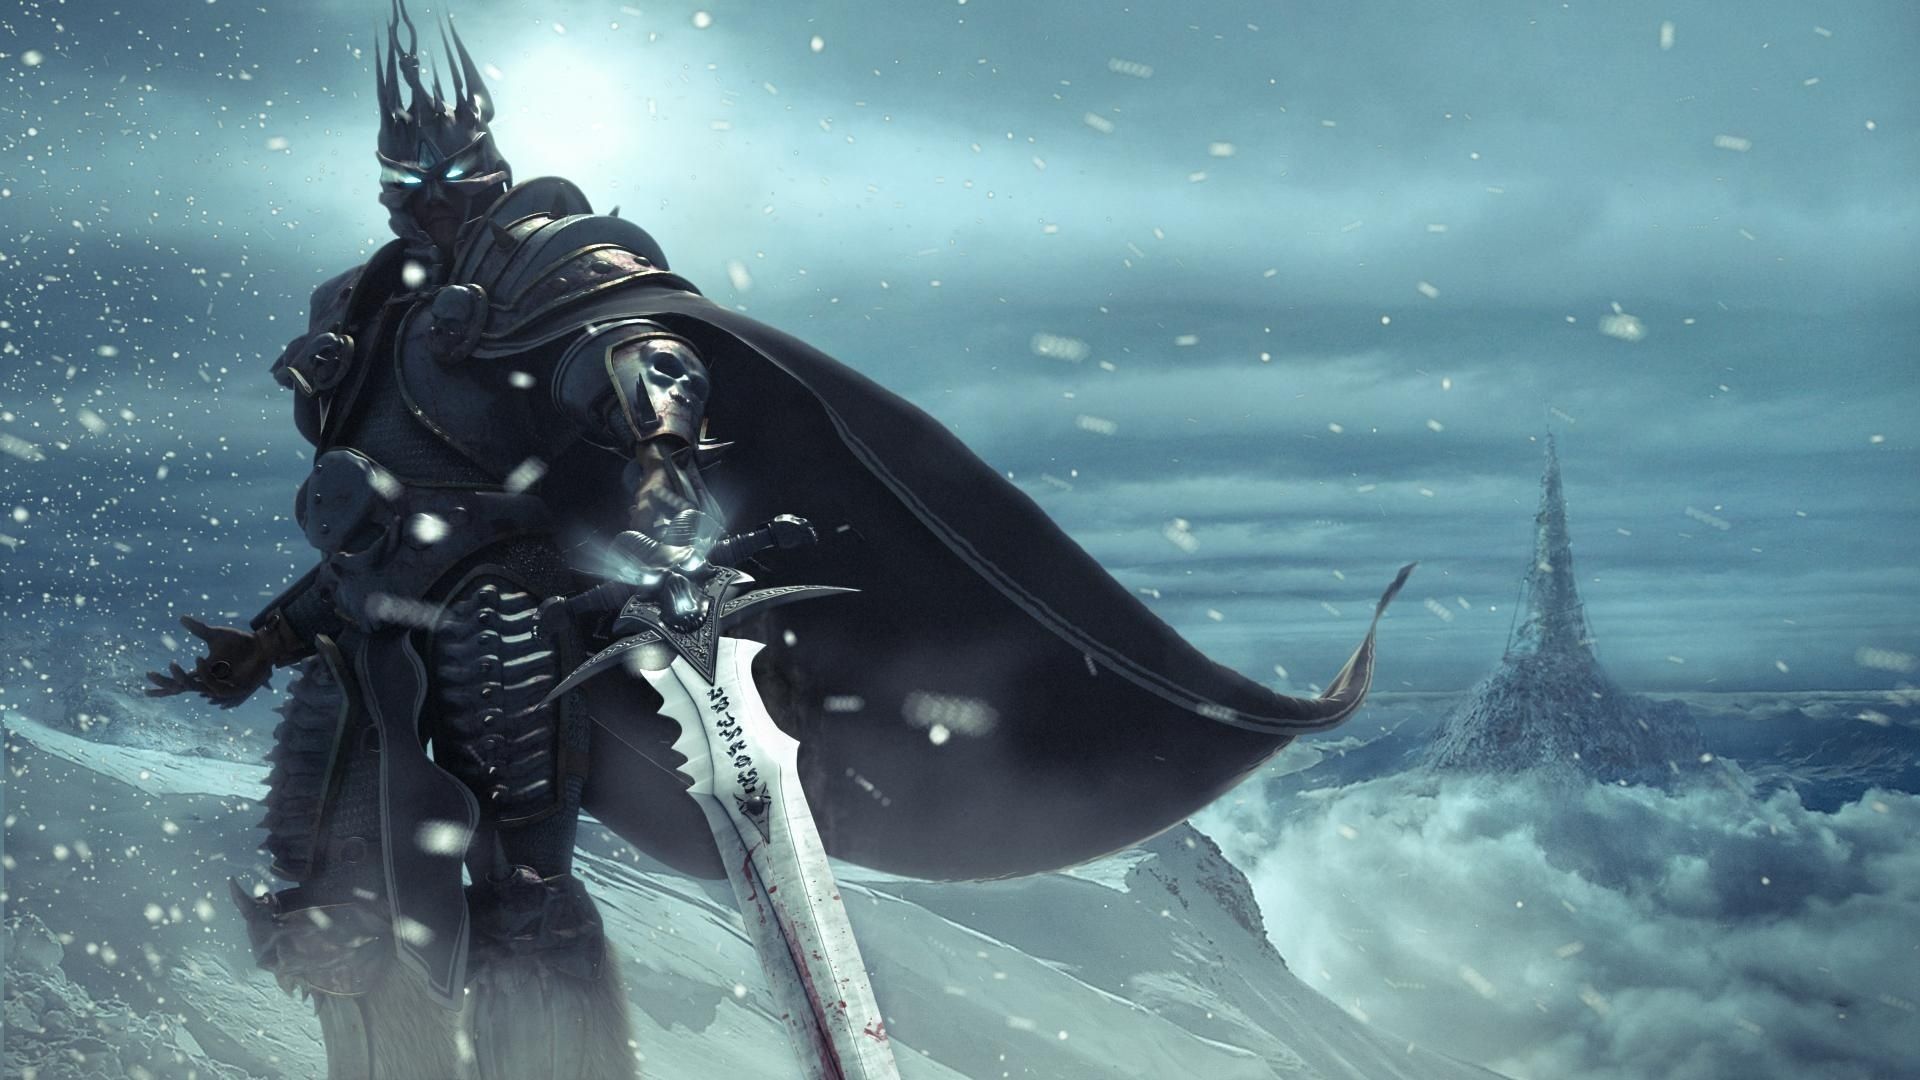 1920x1080 arthas one, world of warcraft, wow, lich king Wallpapers ...